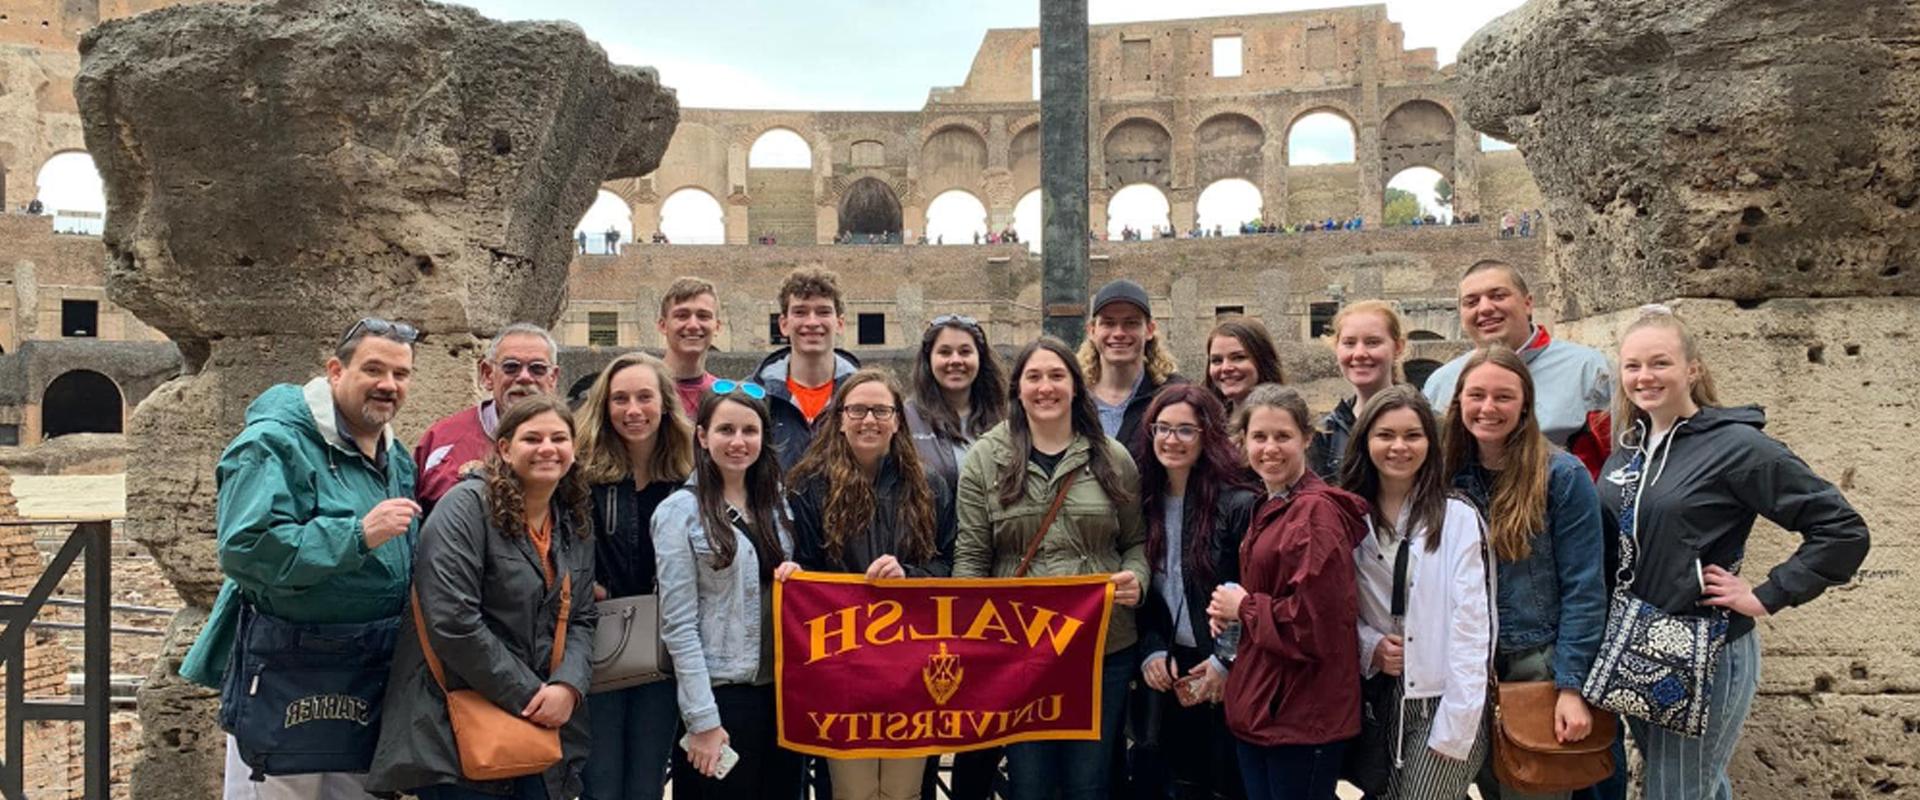 Walsh University Global Learning group in Rome holding up a Walsh flag